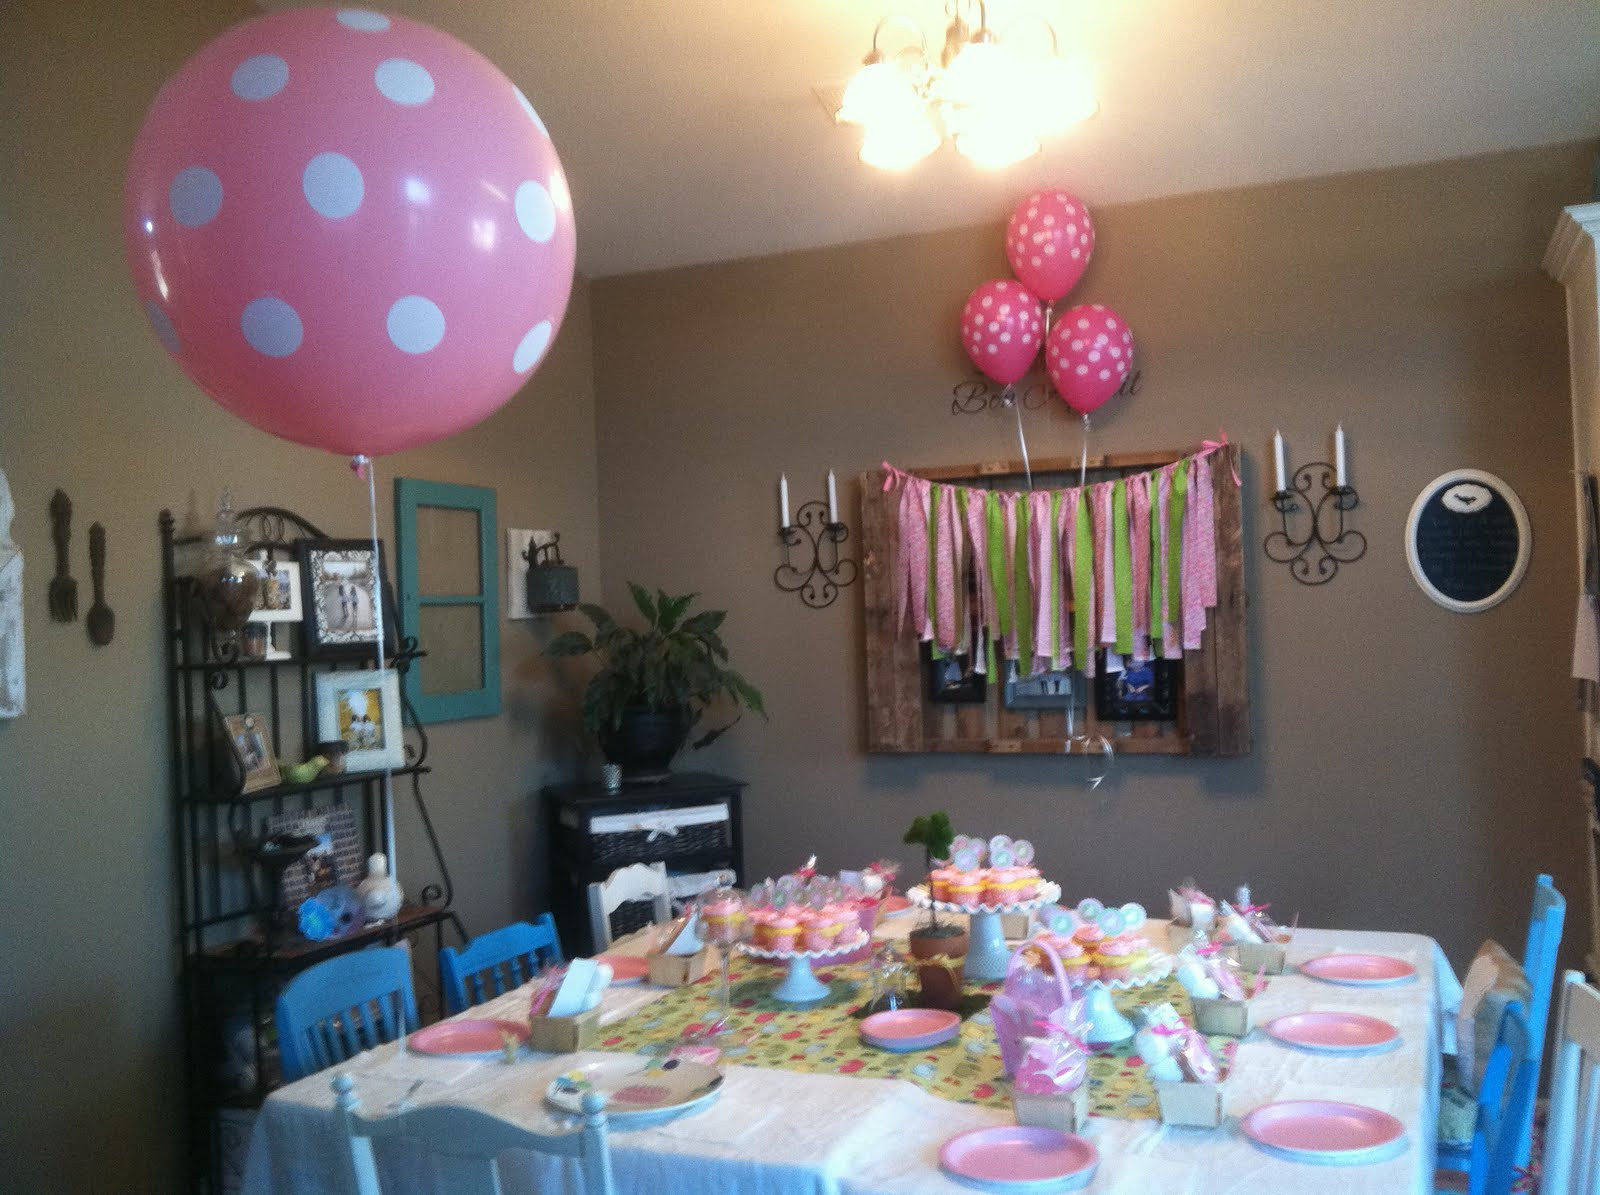 8 Year Old Birthday Party Ideas
 The Baeza Blog Emma s Bunny Birthday Party 8 Years Old 